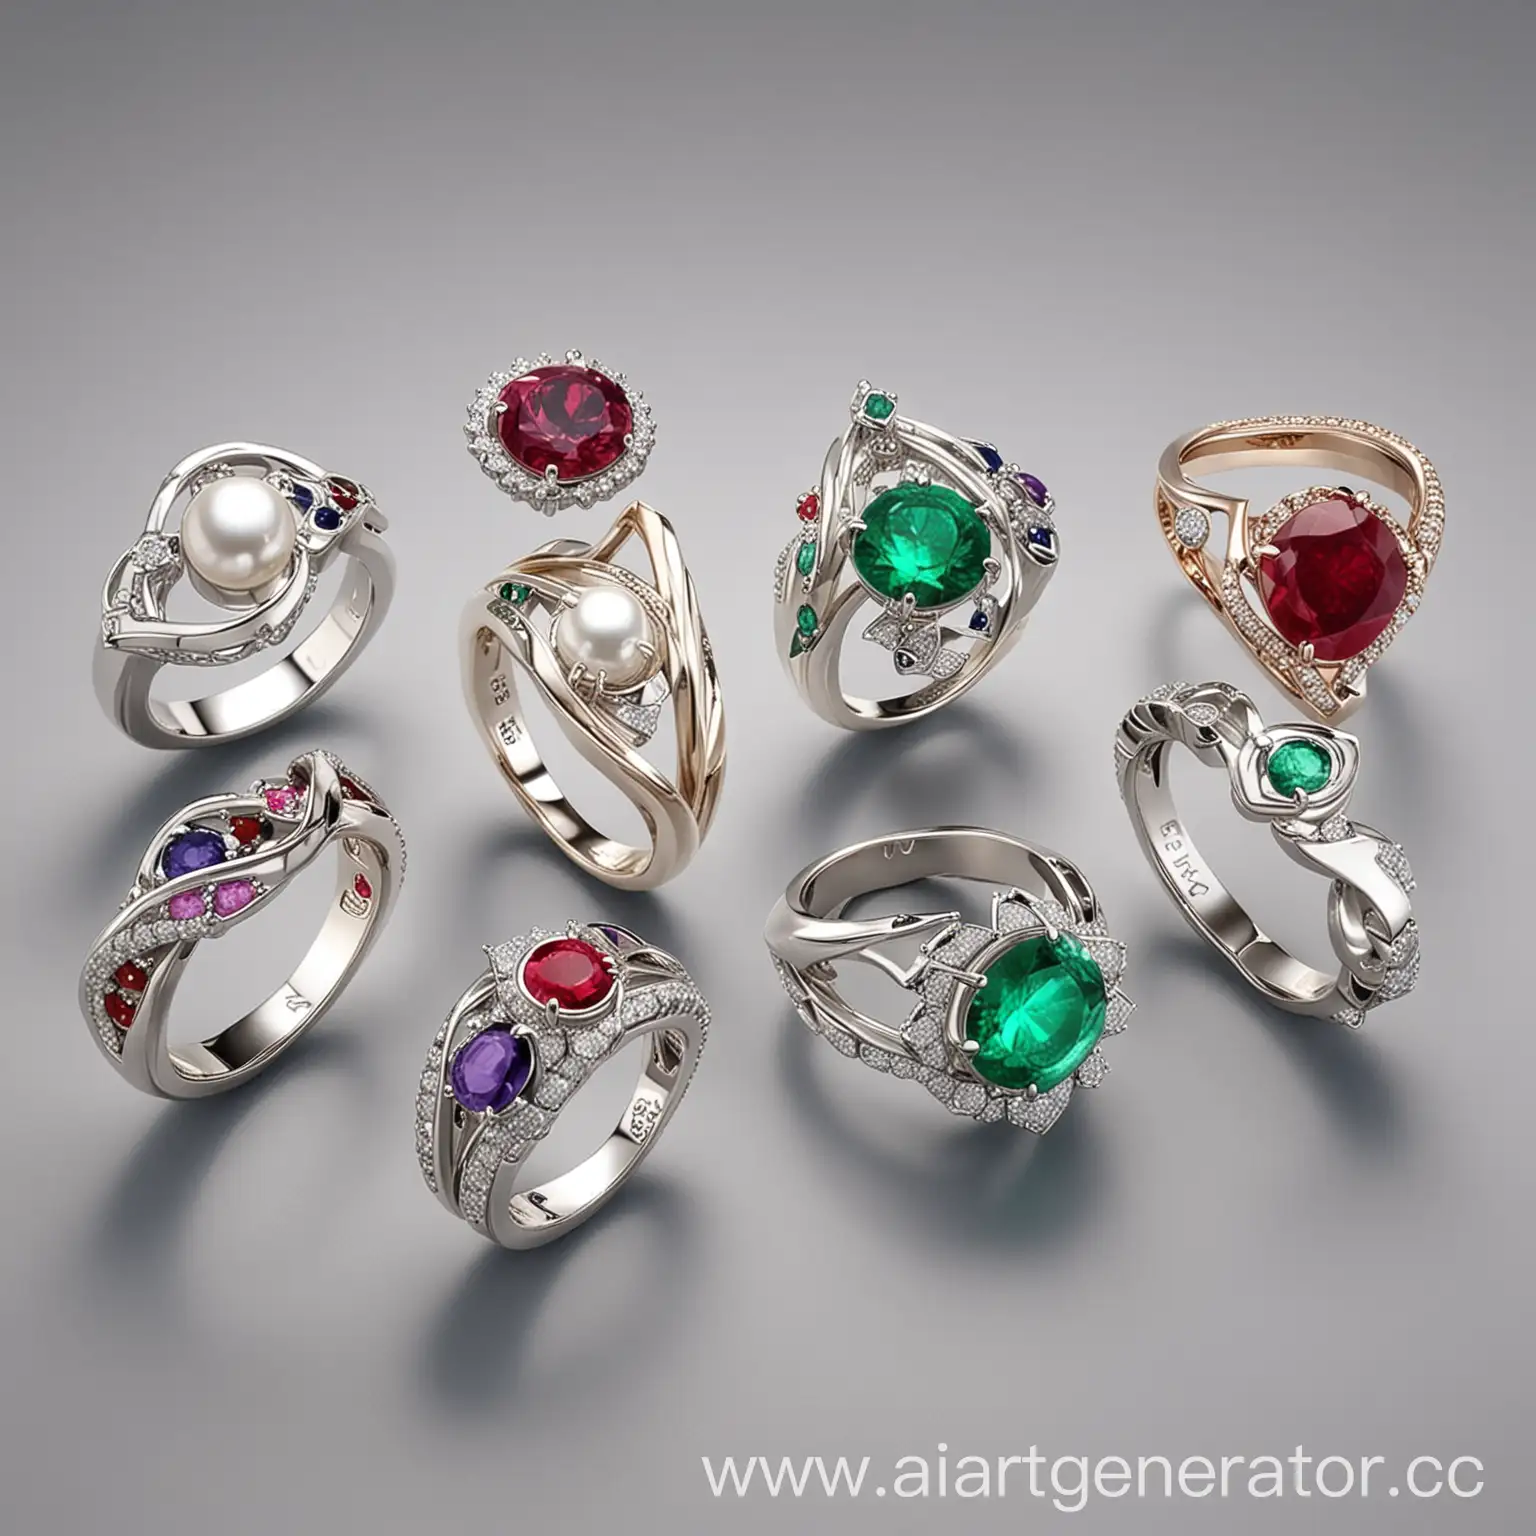 Modern-Futuristic-Silver-Rings-Collection-with-Precious-Stones